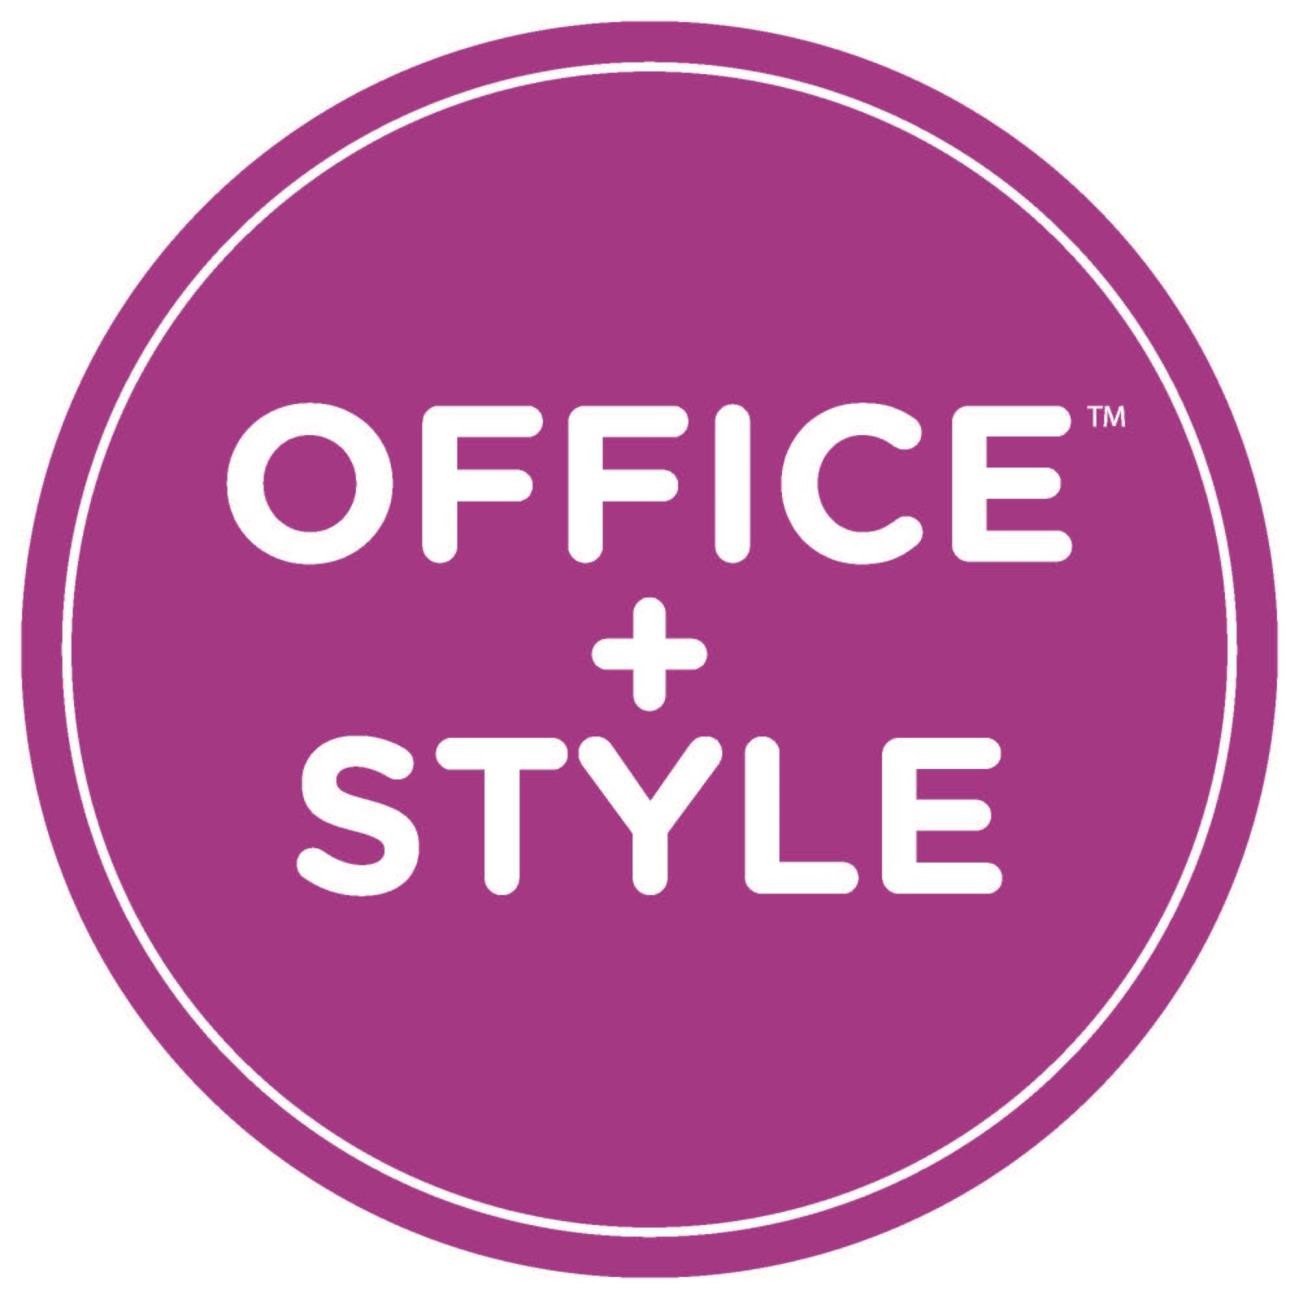  OFFICE + STYLE